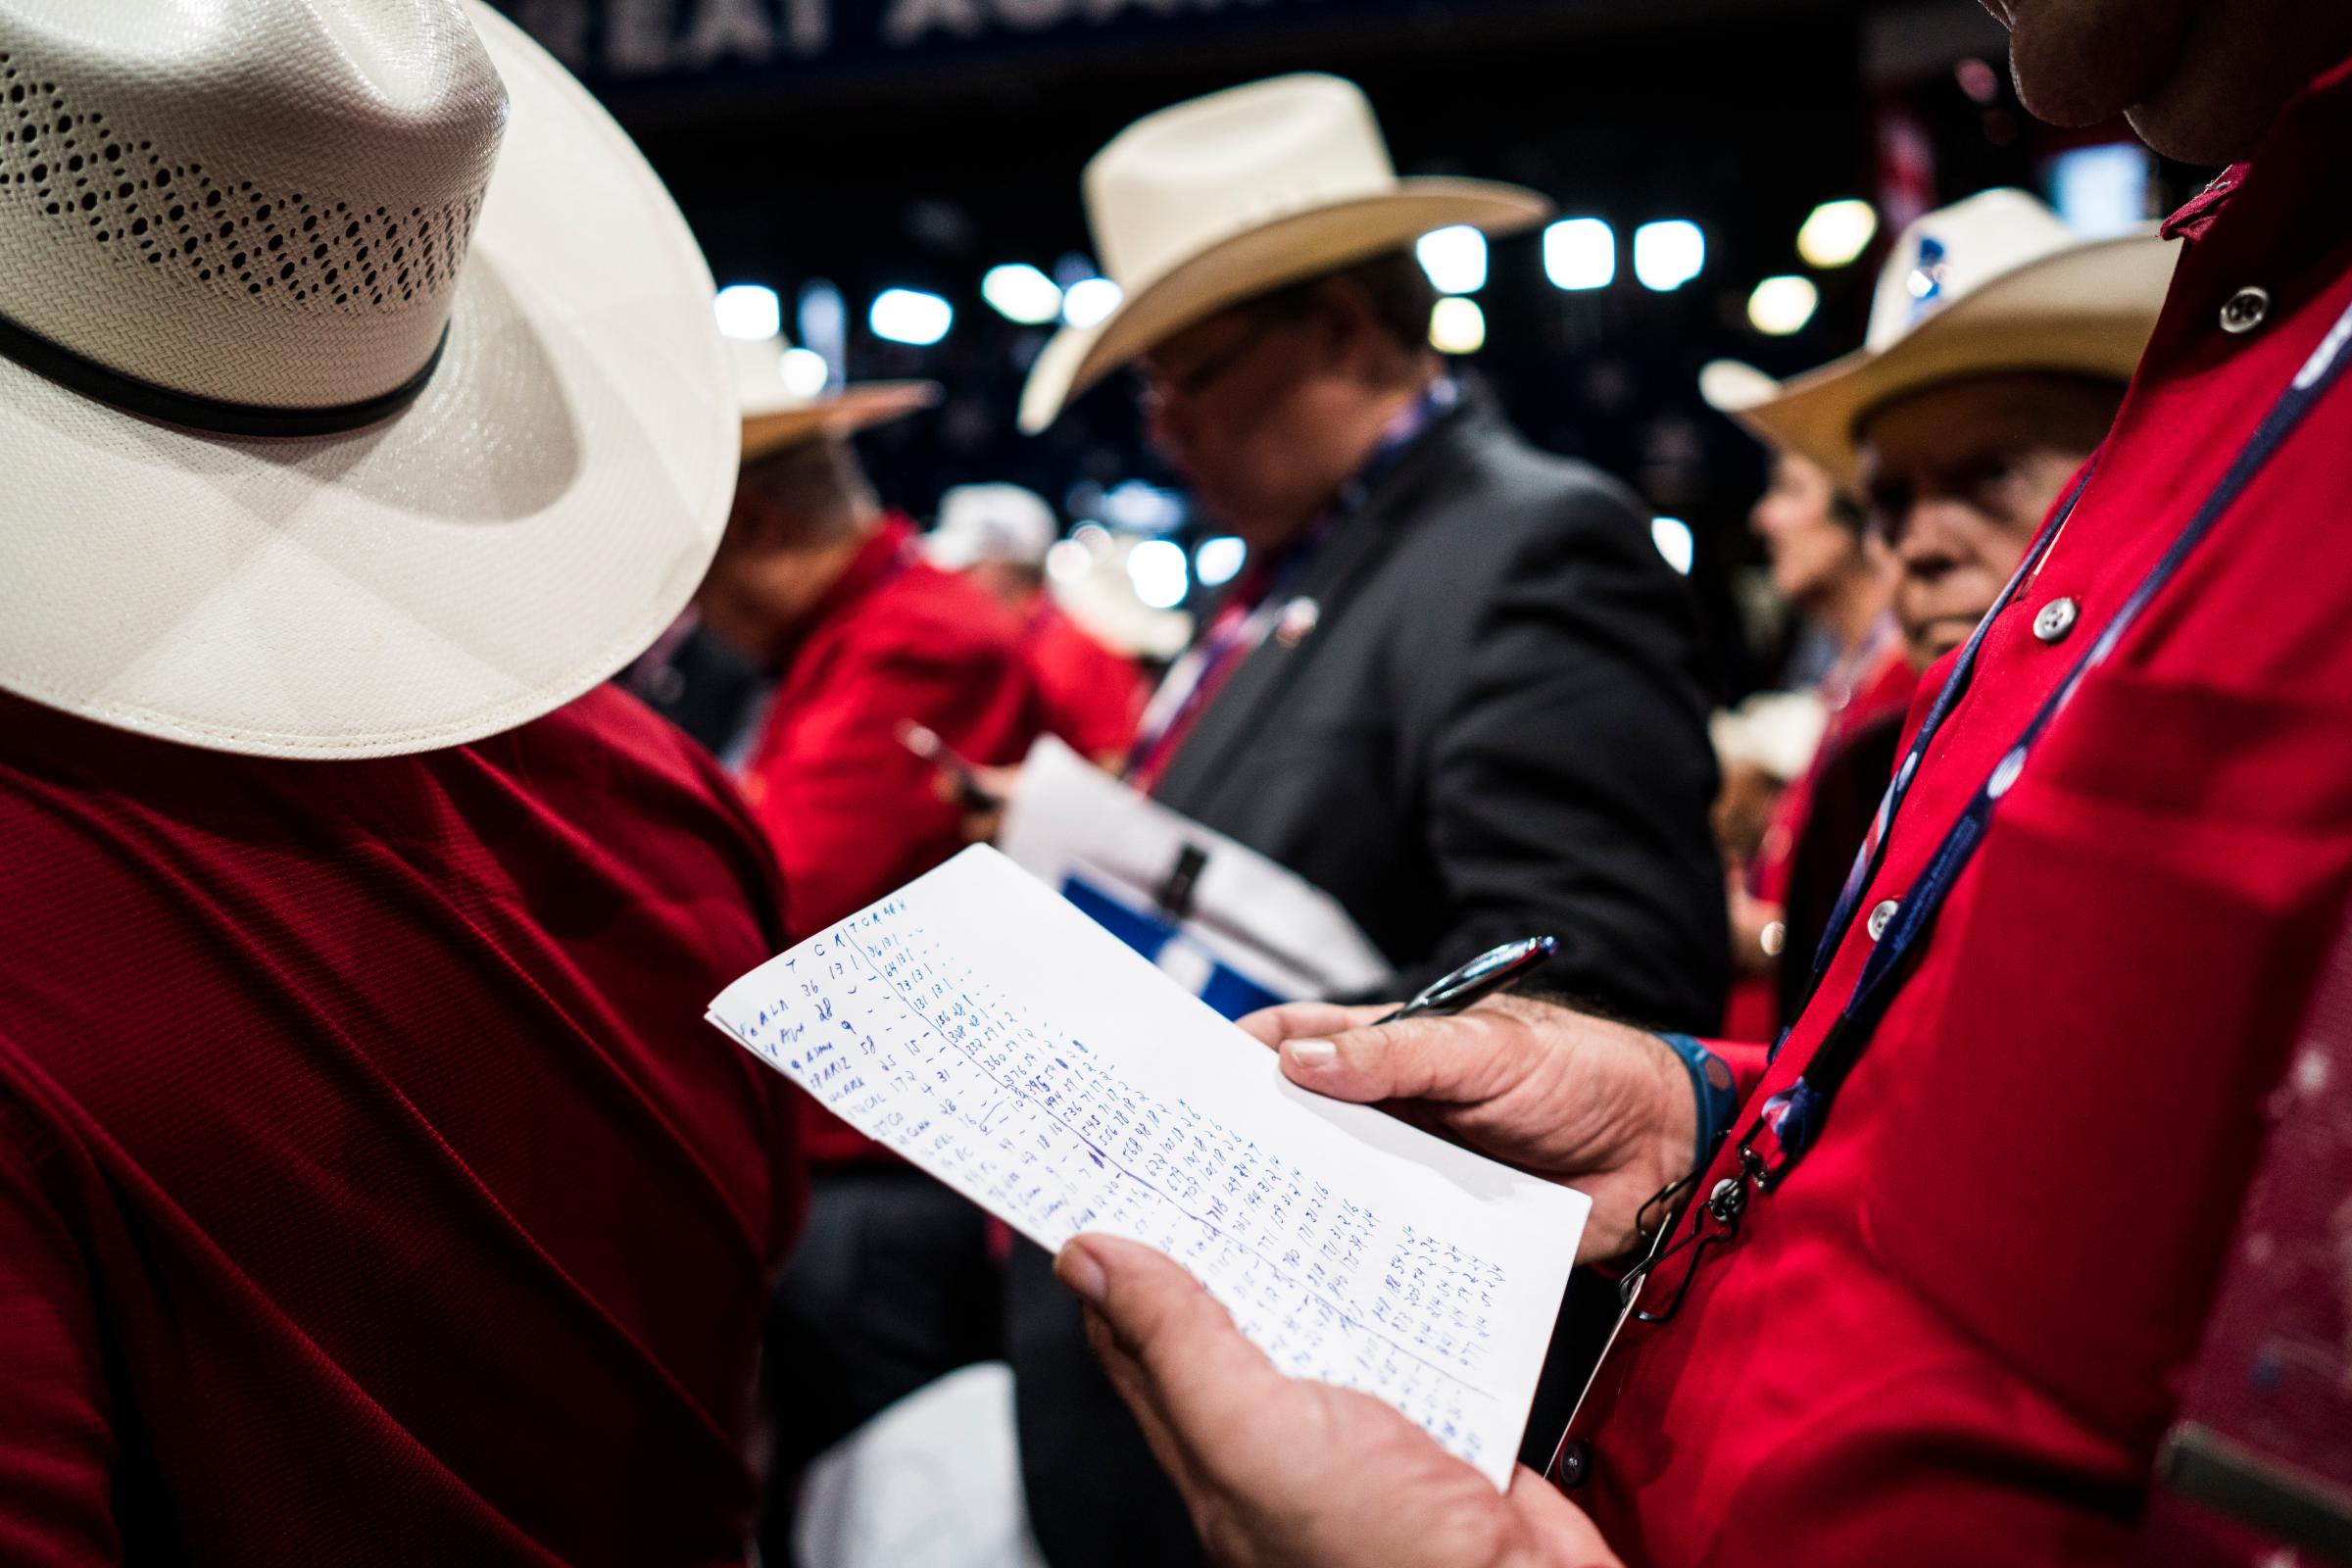 A Texas delegate tallies up the votes for the Donald Trump's nomination at the Republican National Convention in Cleveland on Tuesday, July 19, 2016.